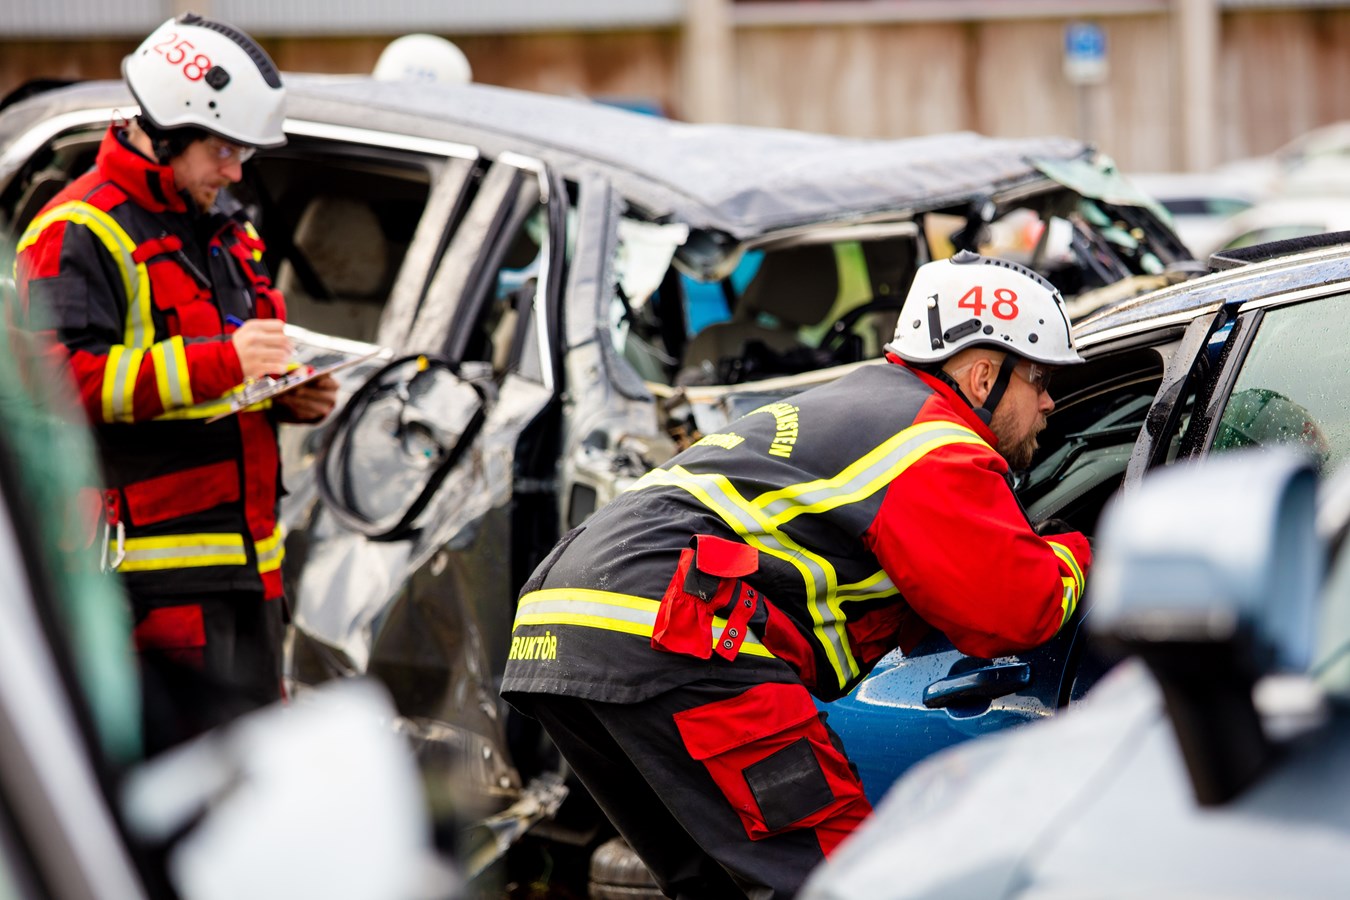 Volvo Cars drops new cars from 30 metres to help rescue services save lives